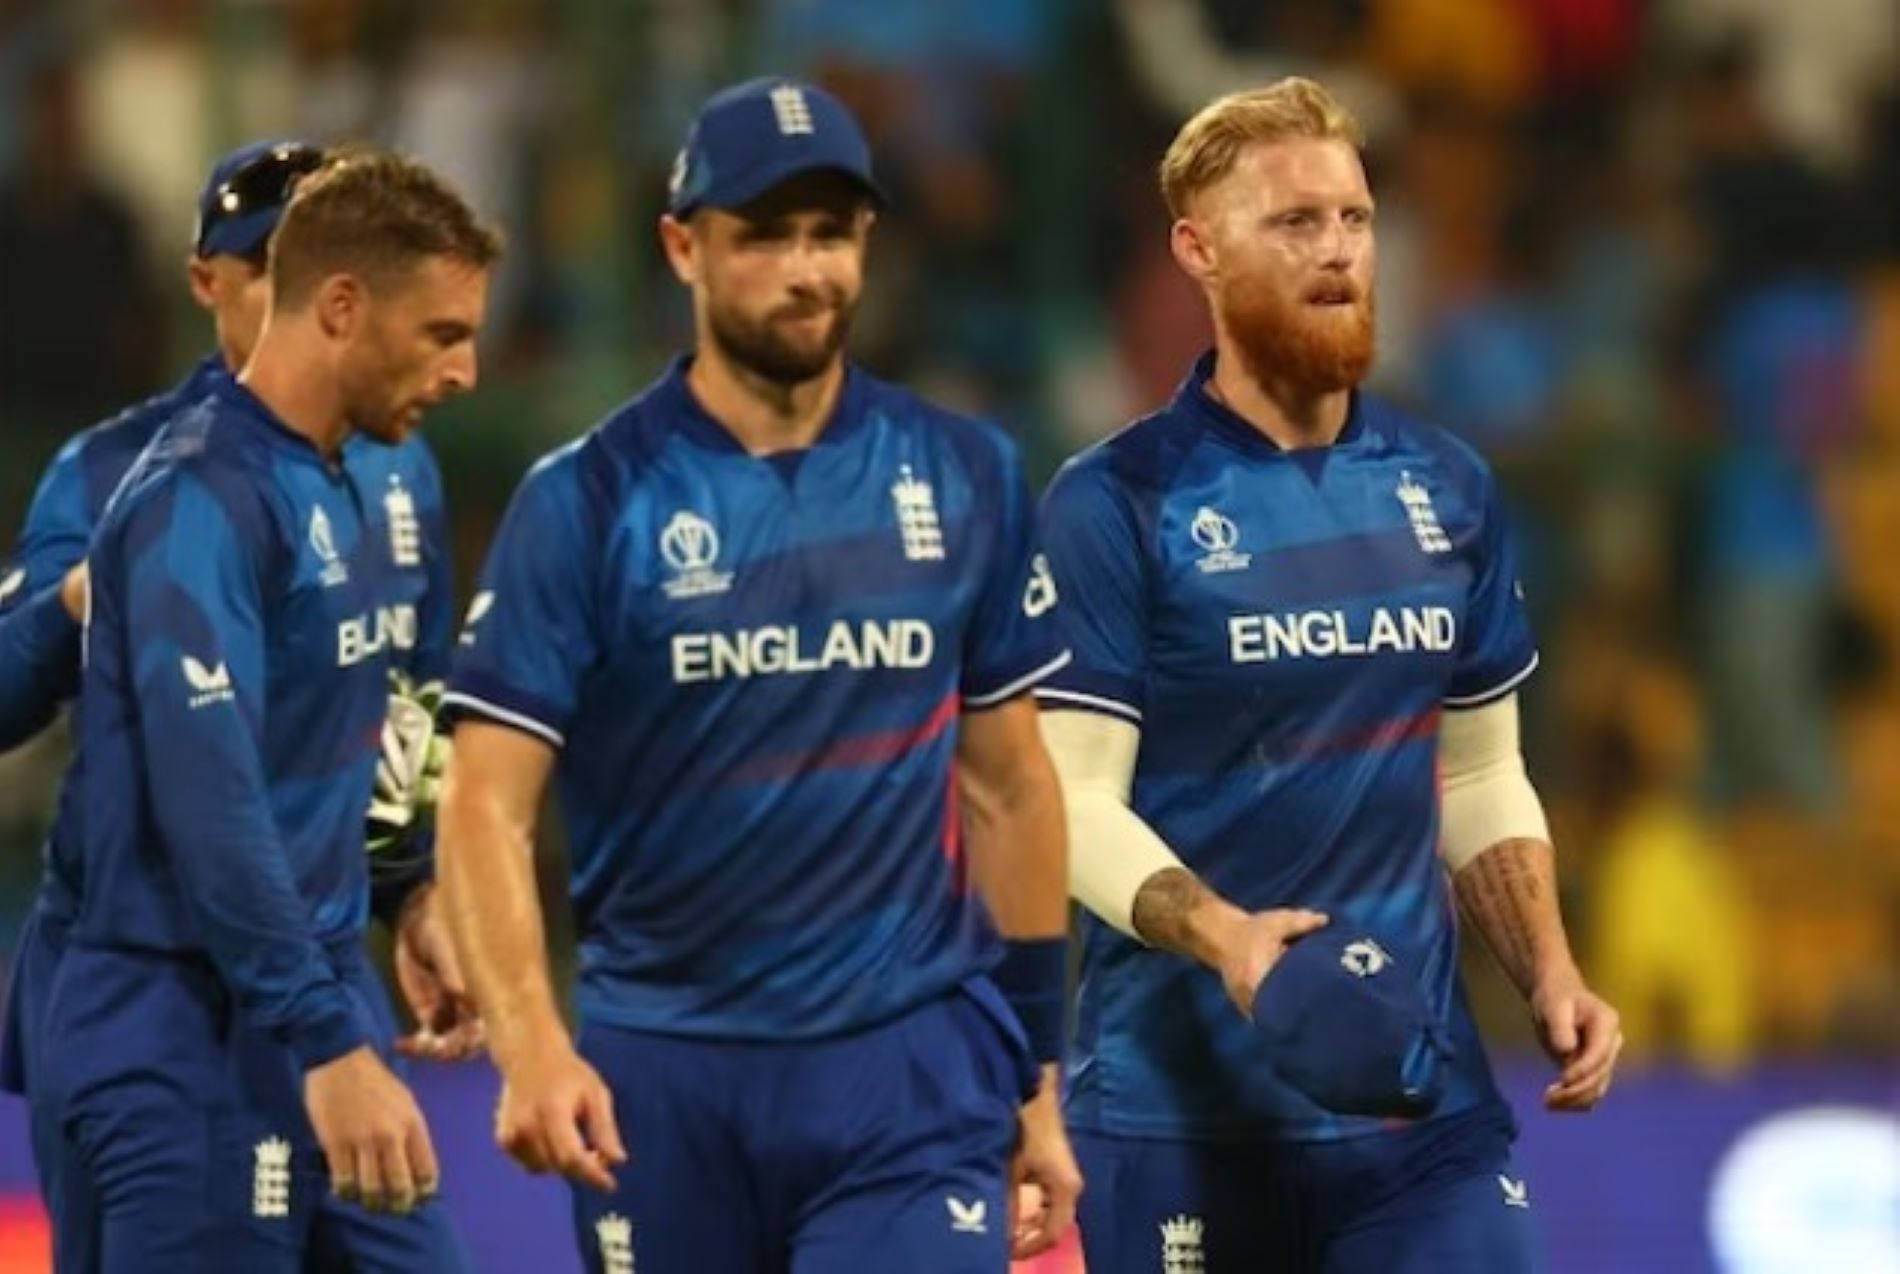 England struggled to come to terms with the high expectations